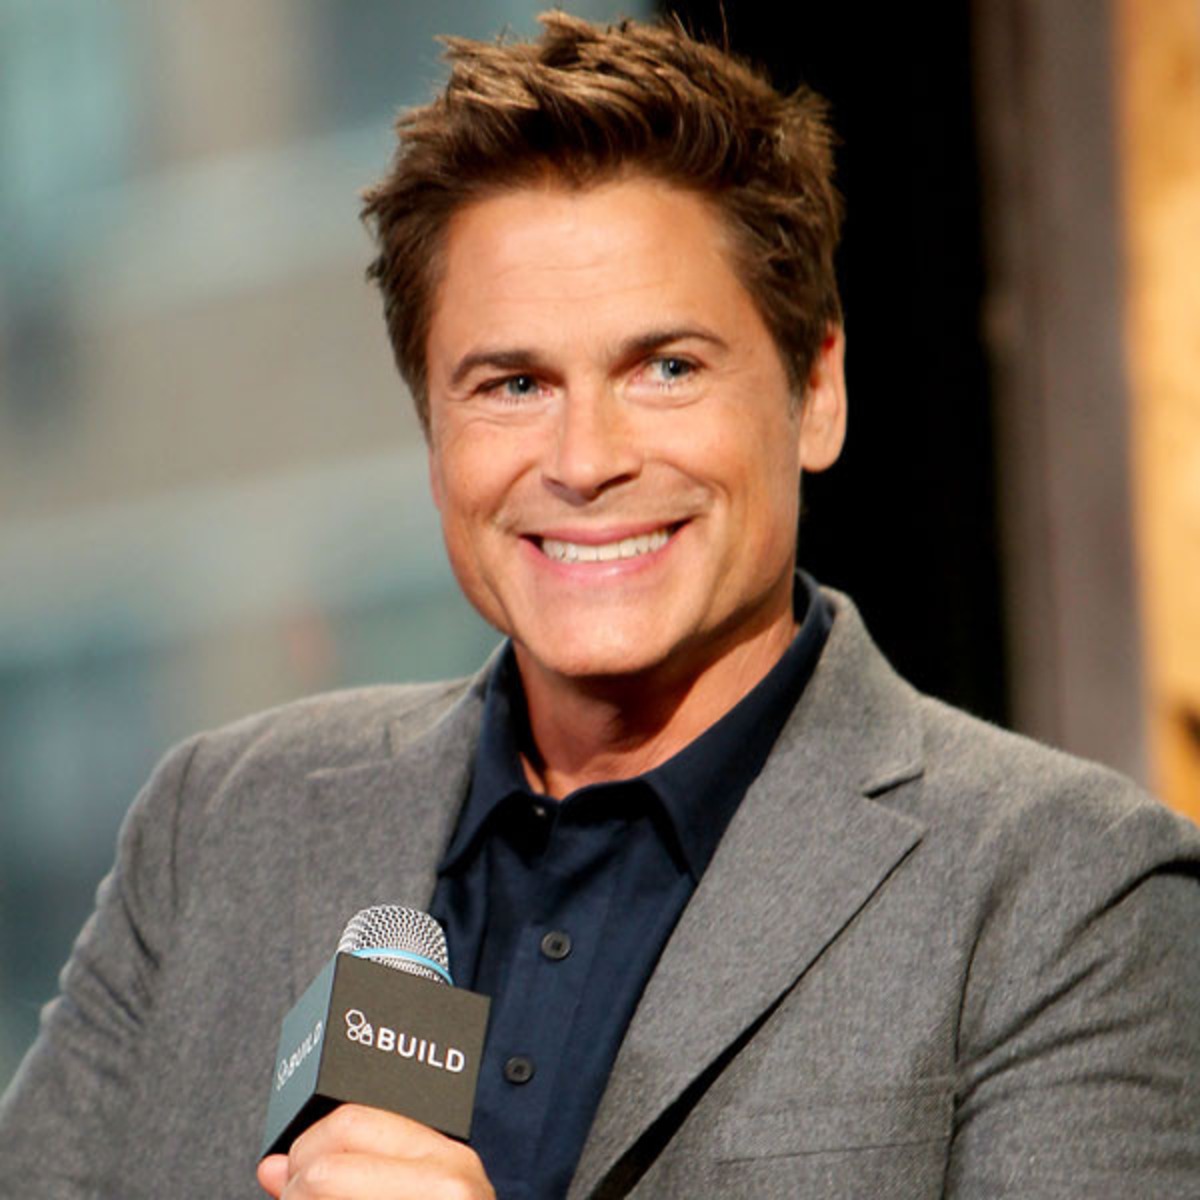 Rob Lowe Thinks Men Are Objectified on TV - E! Online